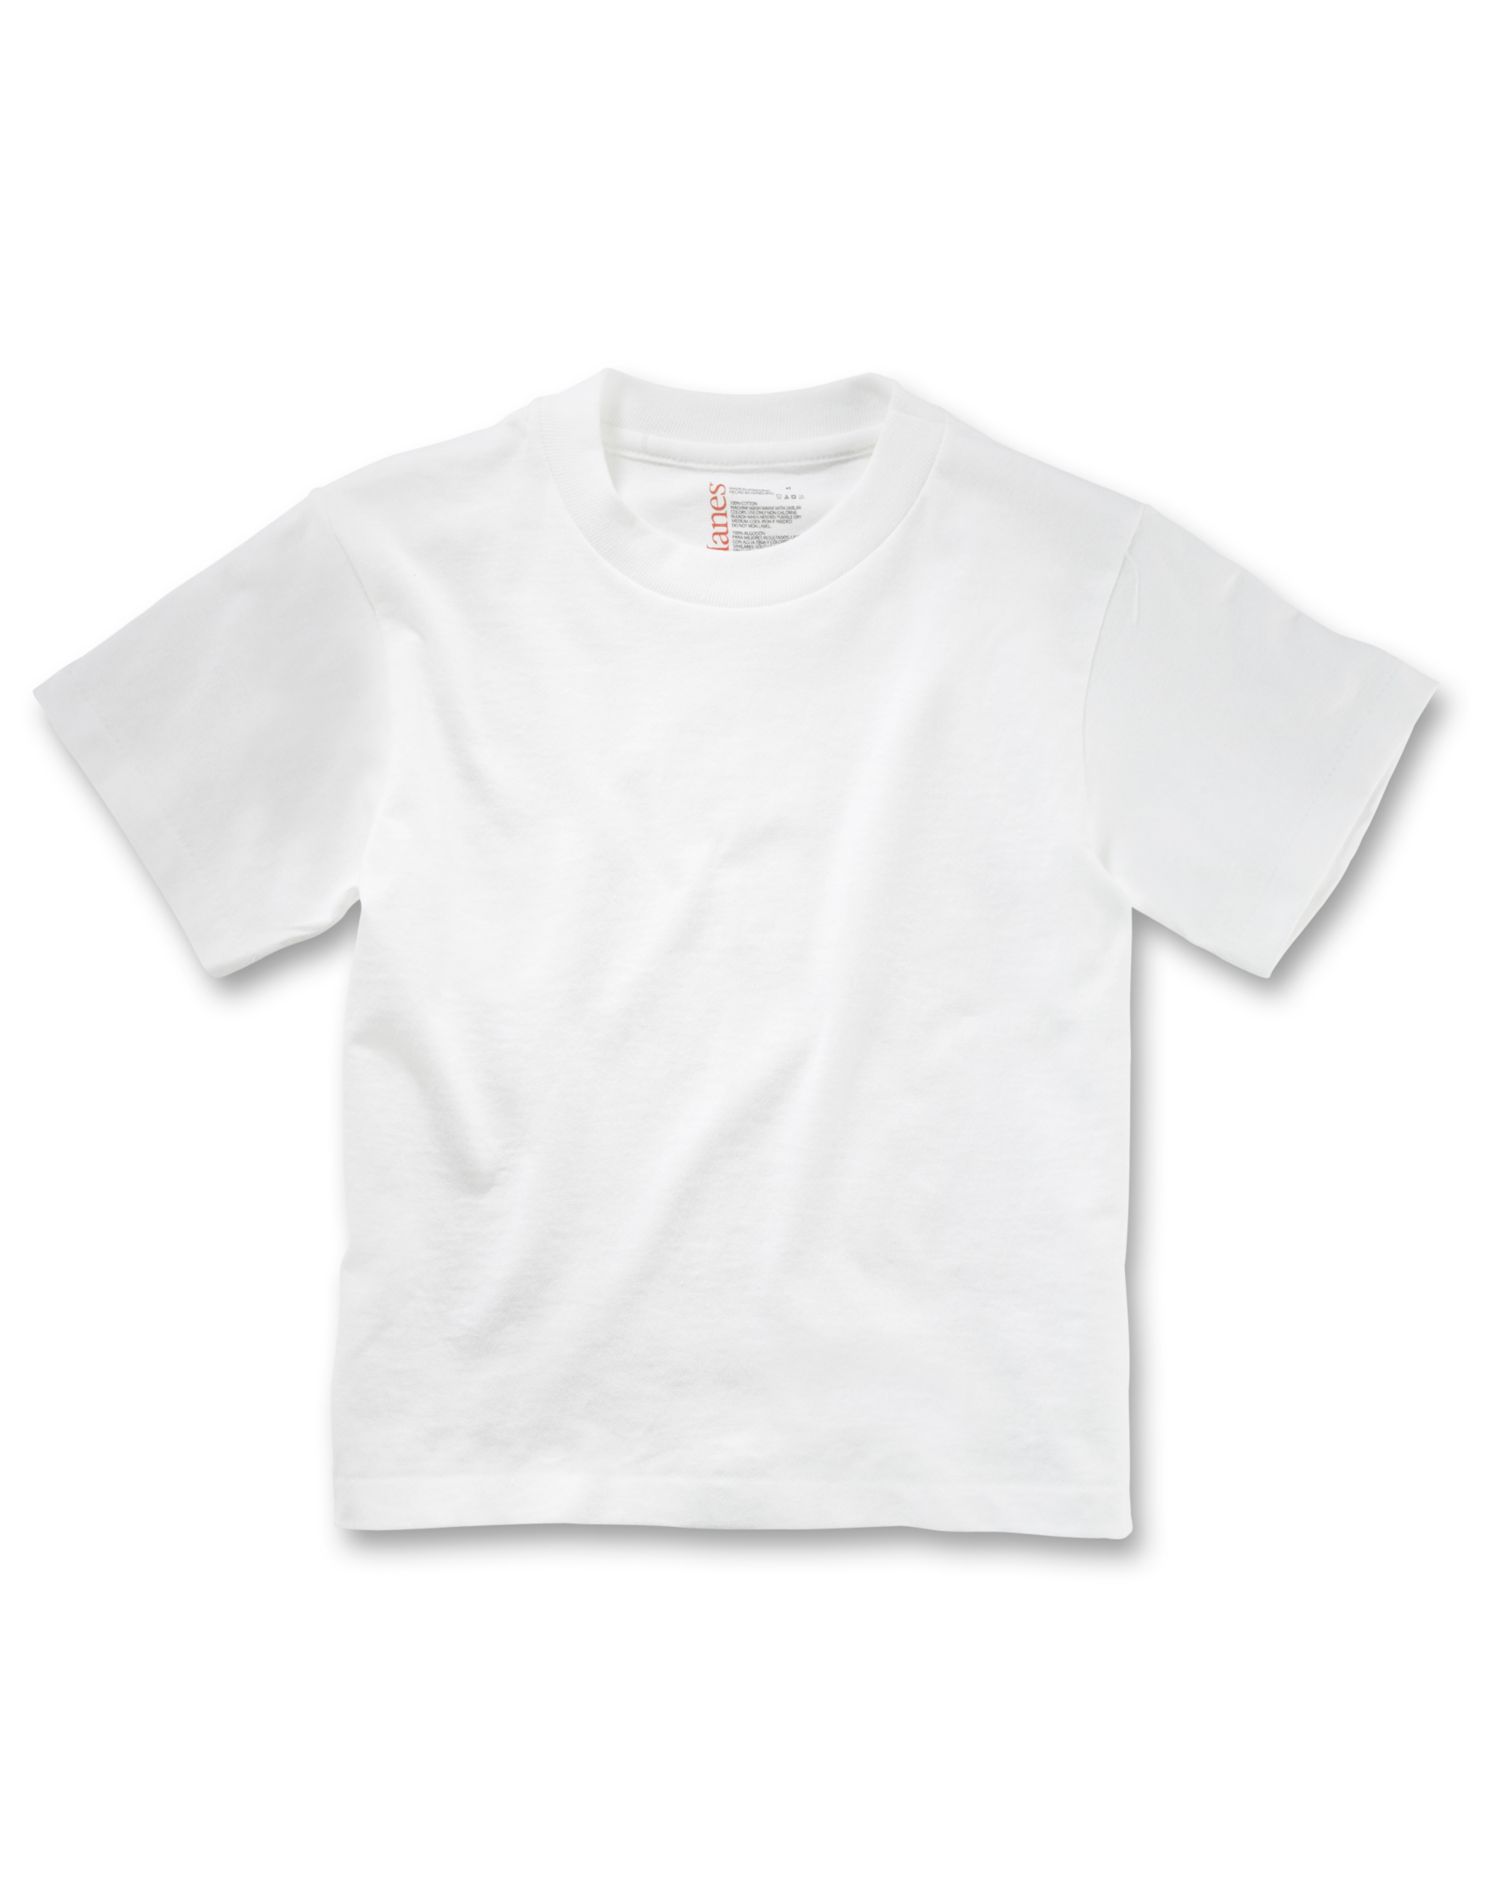 Hanes Toddler Boy Crew Undershirt, 5 Pack, Sizes 2T-5T - image 2 of 4